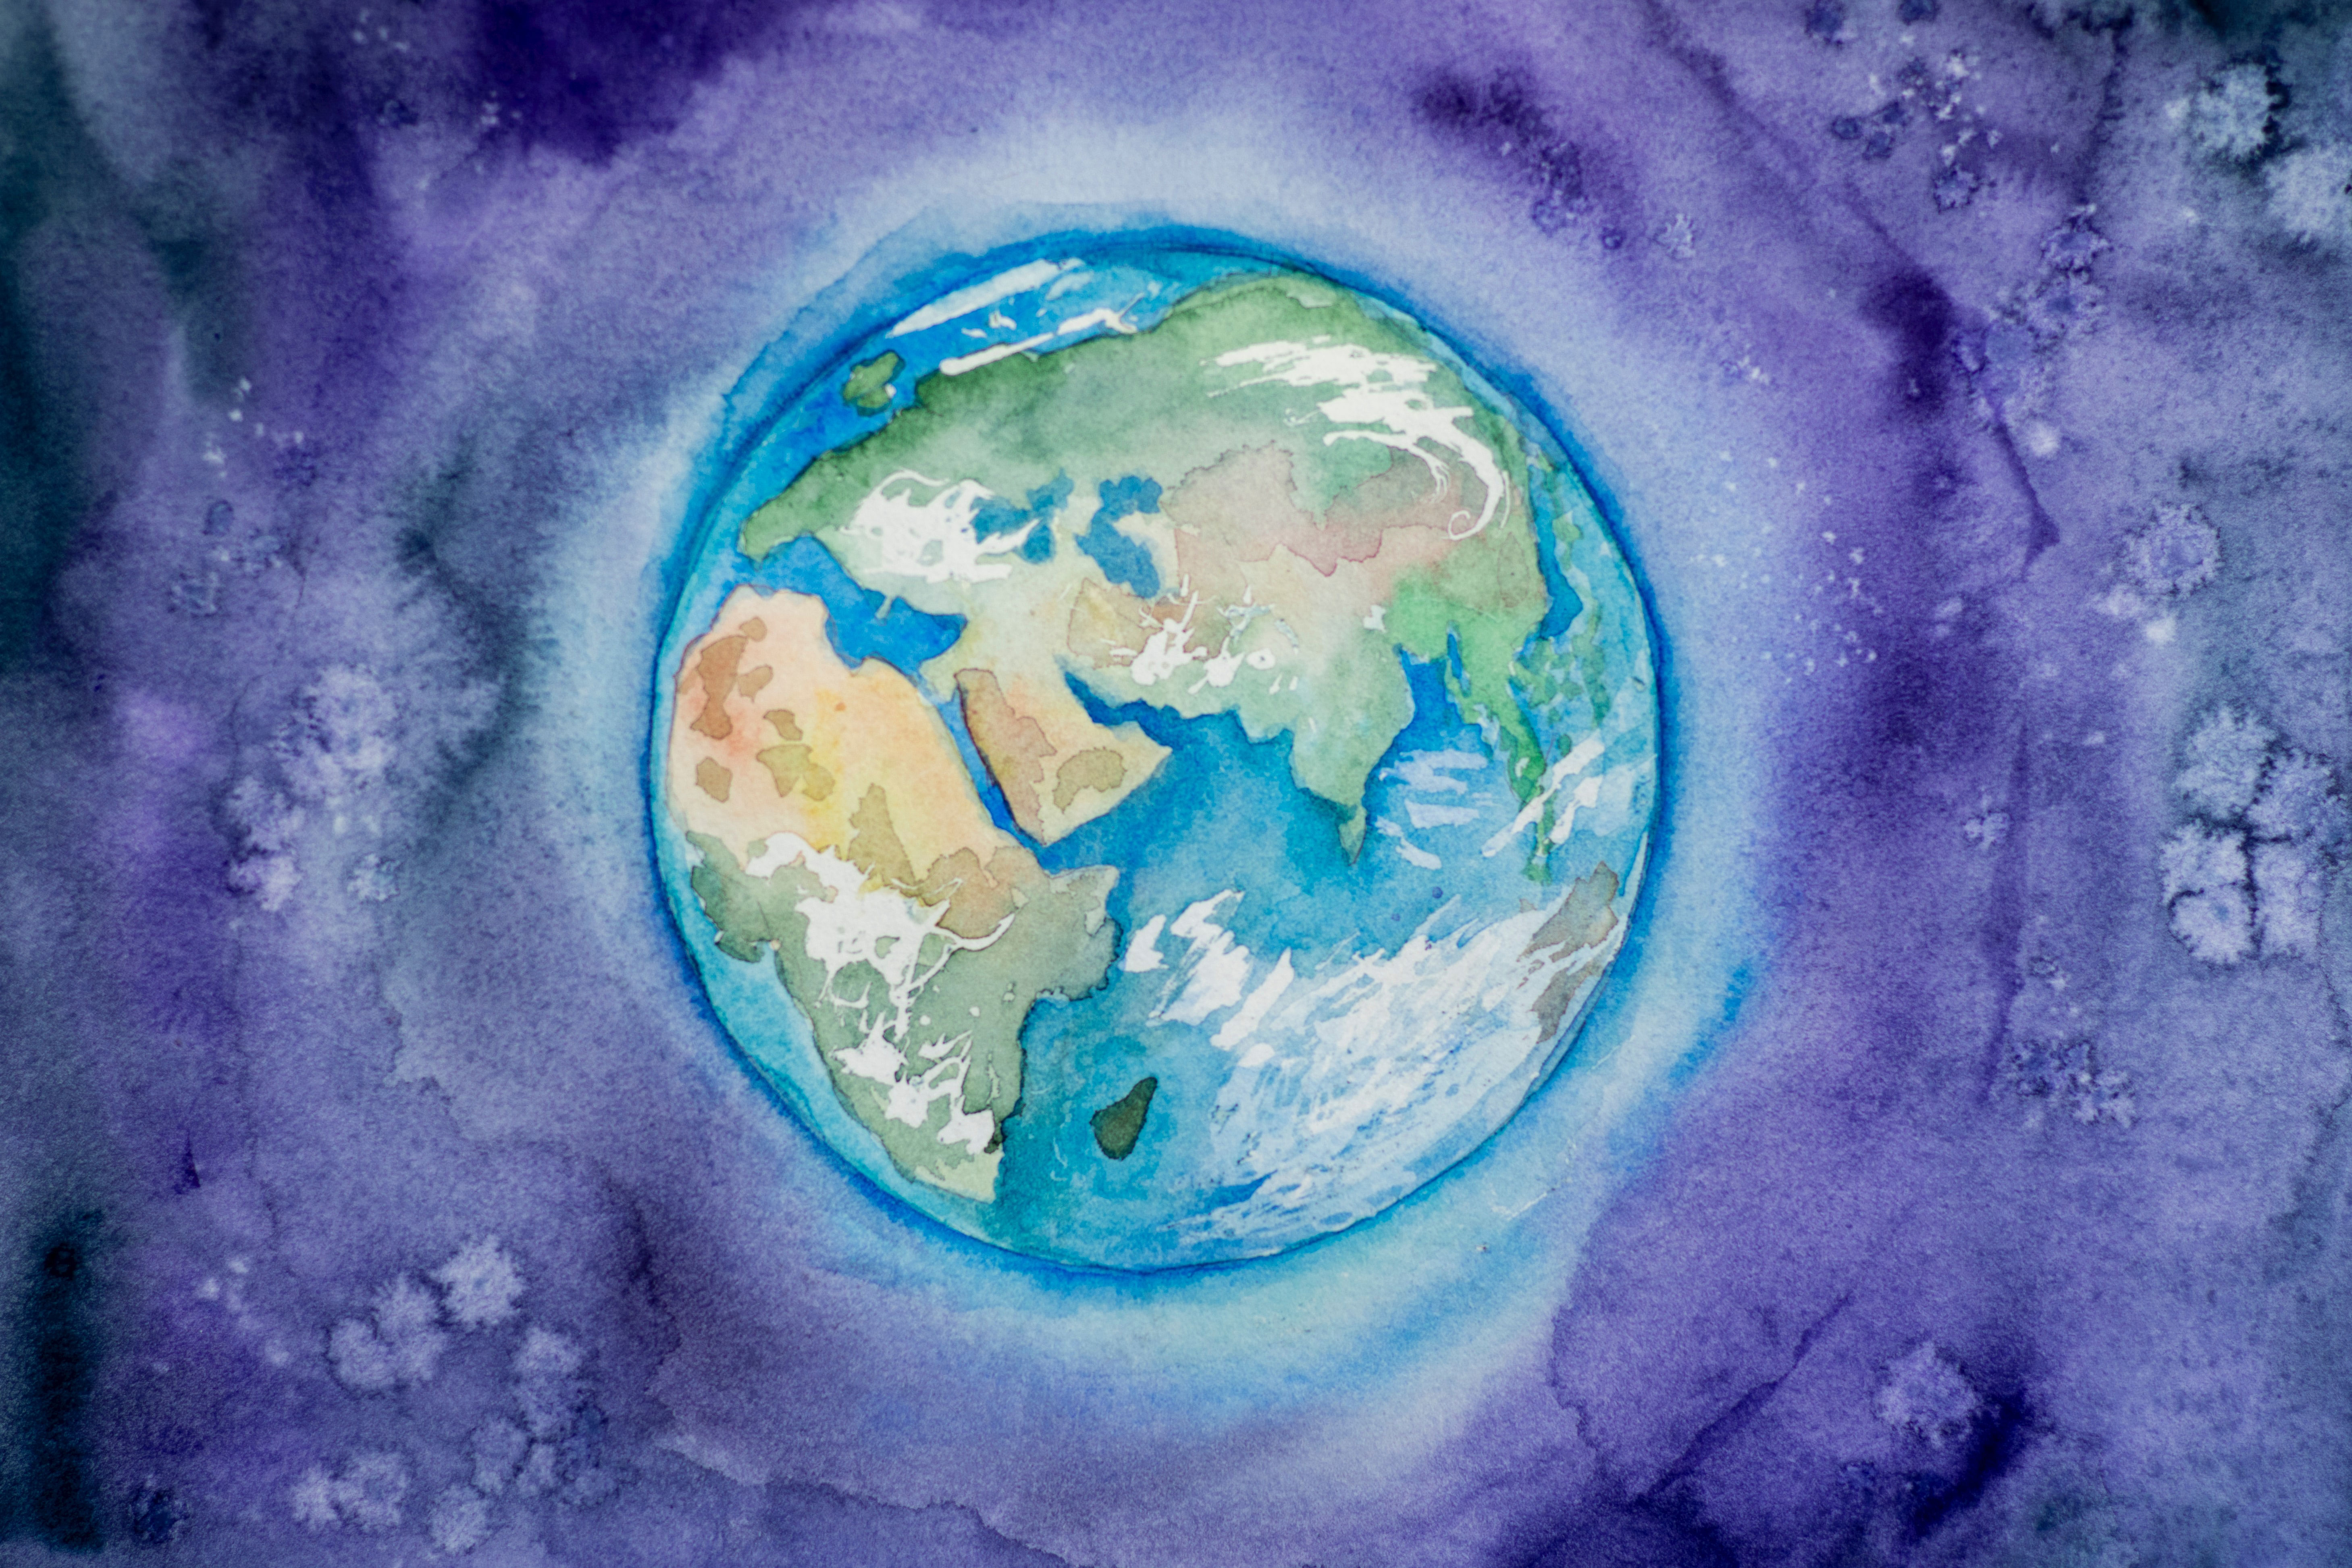 Watercolour painting of planet Earth 